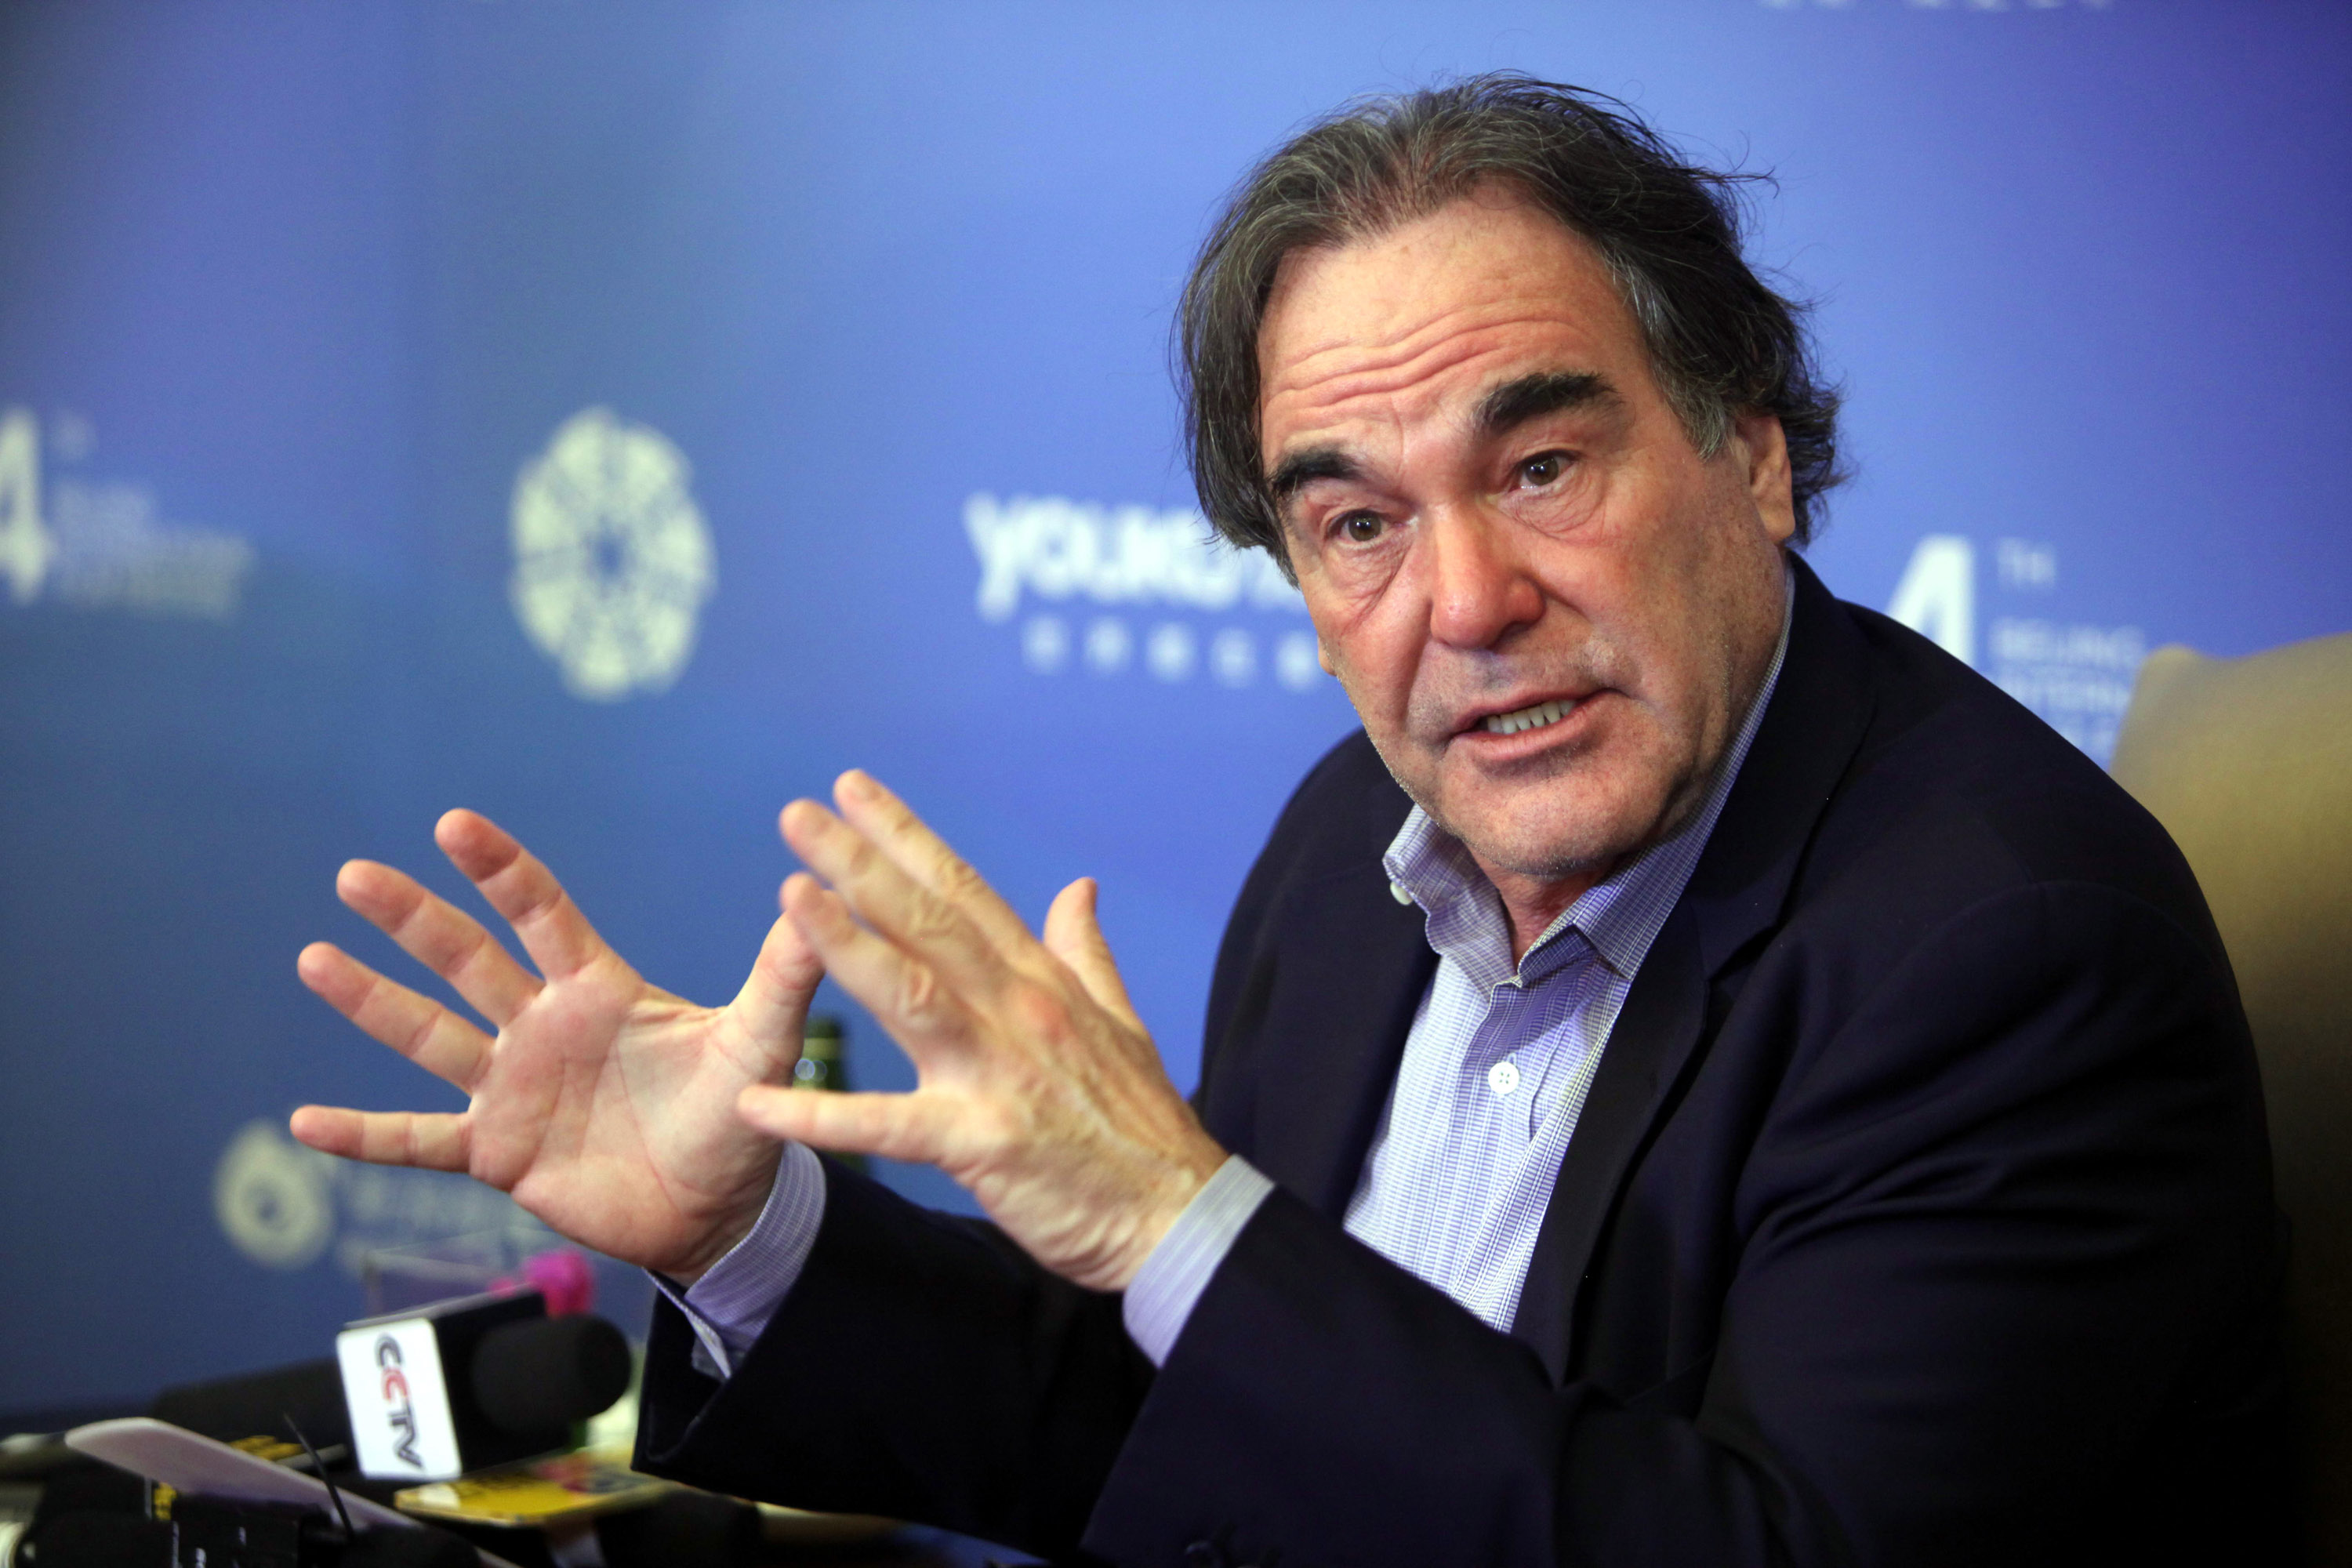 Film director Oliver Stone is interviewed during a press conference as part of the 4th Beijing International Film Festival on April 16, 2014 in Beijing. (ChinaFotoPress/Getty Images)